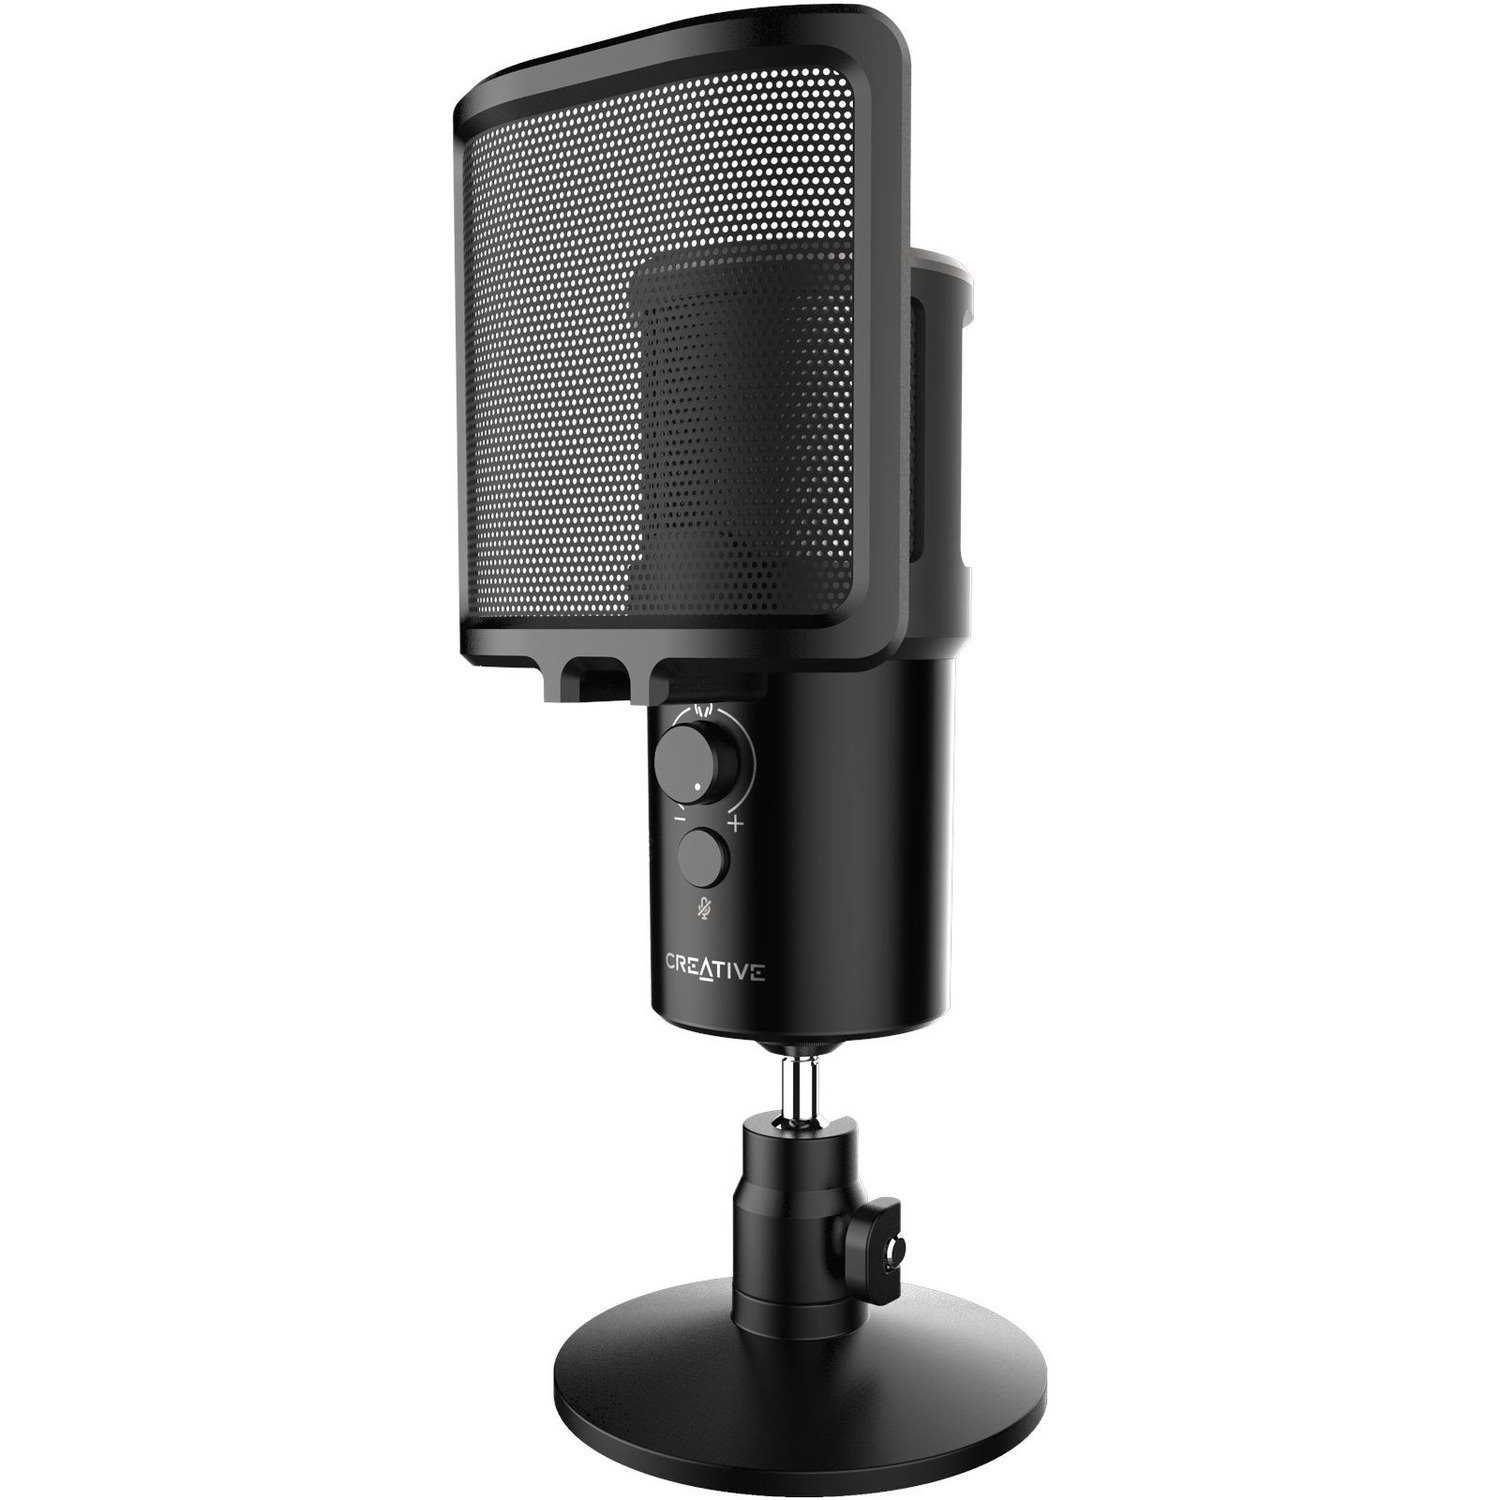 Creative Live! Mic M3 Wired Condenser Microphone for Monitoring, Voice, Communication System, Live Streaming, Broadcasting, Recording, Gaming